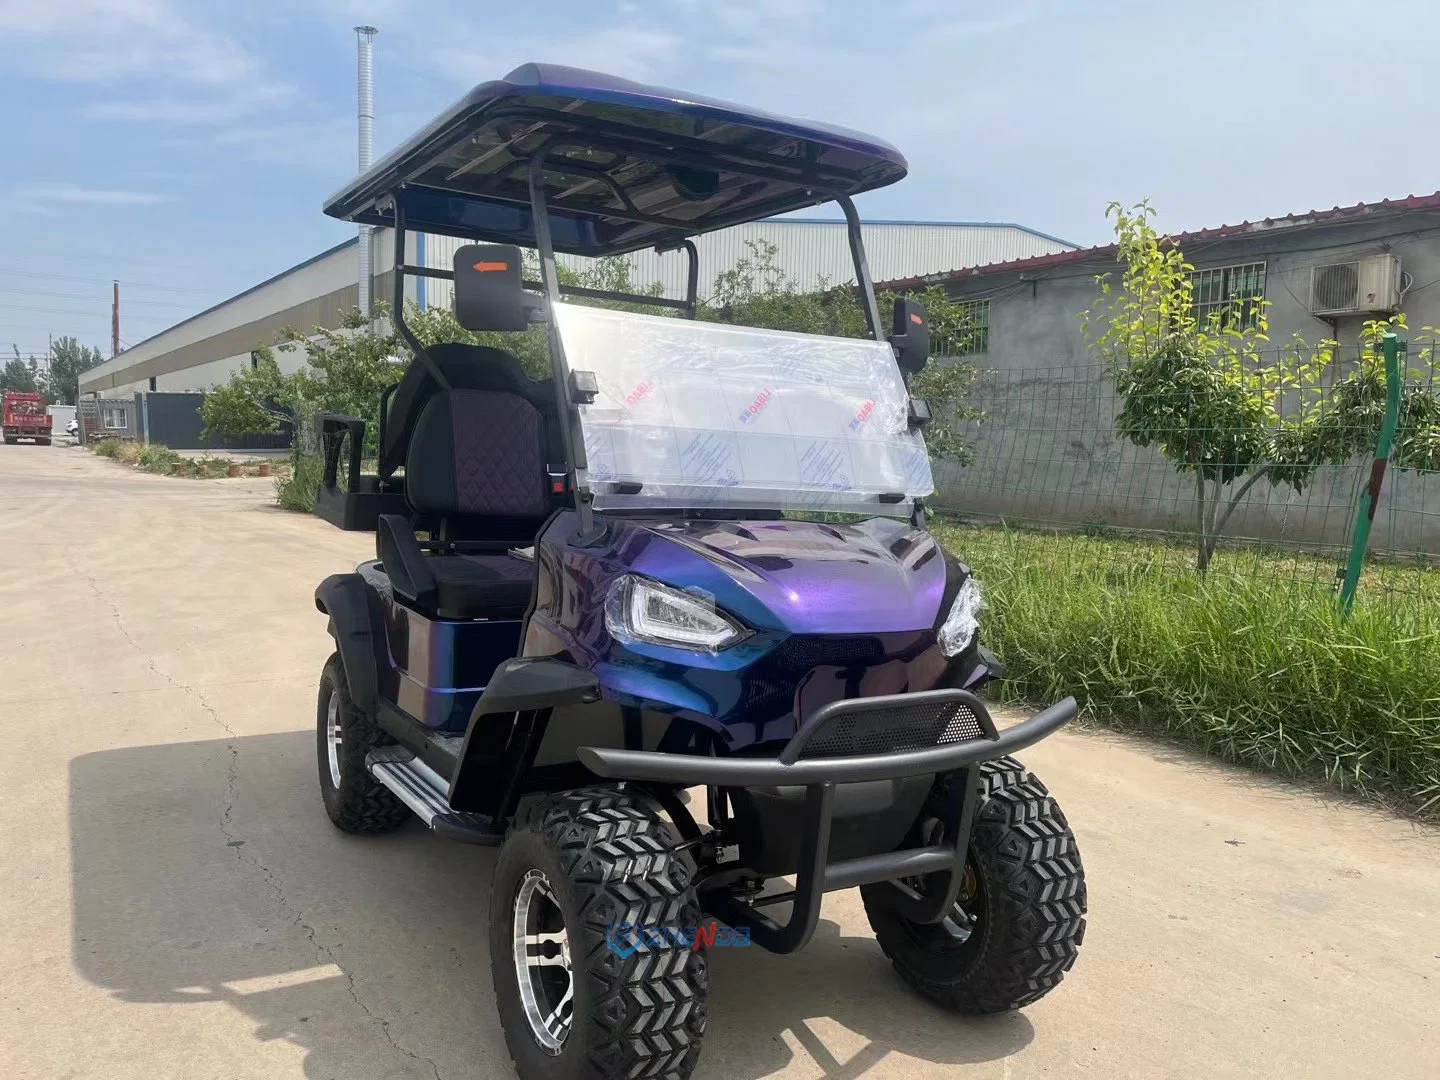 Zhenda New Golf Cart / New Energy Pollution-Free Electric Vehicle with Lithium Battery for Sale